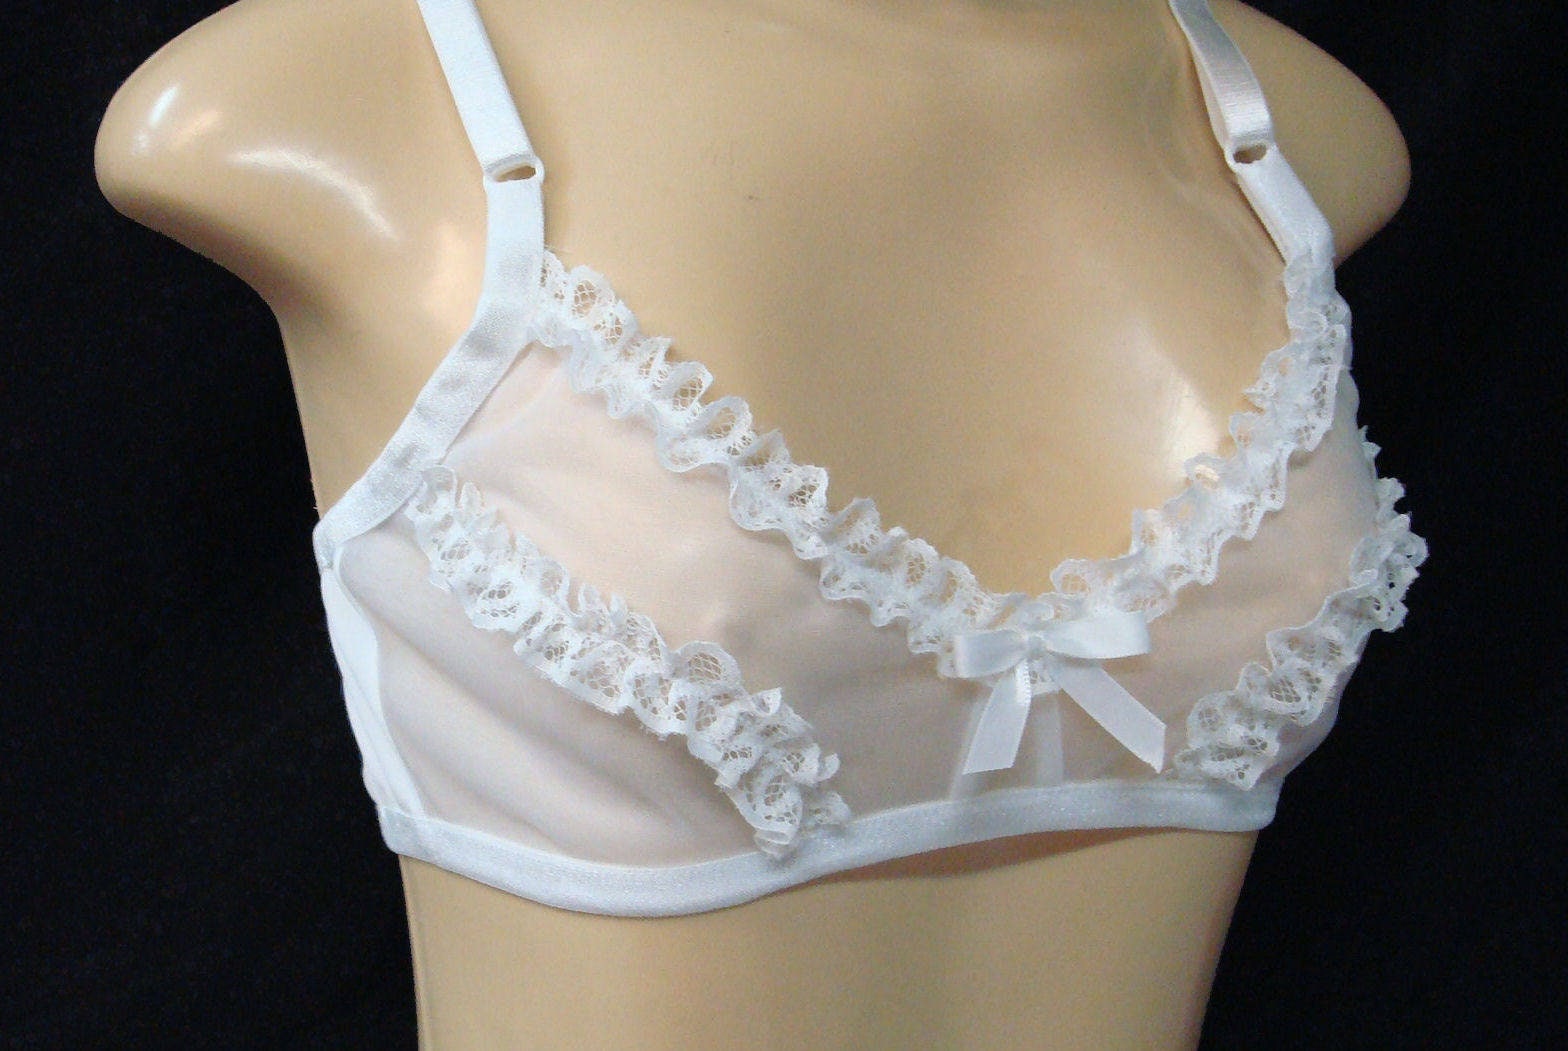 White Sheer Nylon Chiffon BRA with Lace - available in all COLORS Adult  Sissy - Cross Dresser Training Bra for MEN